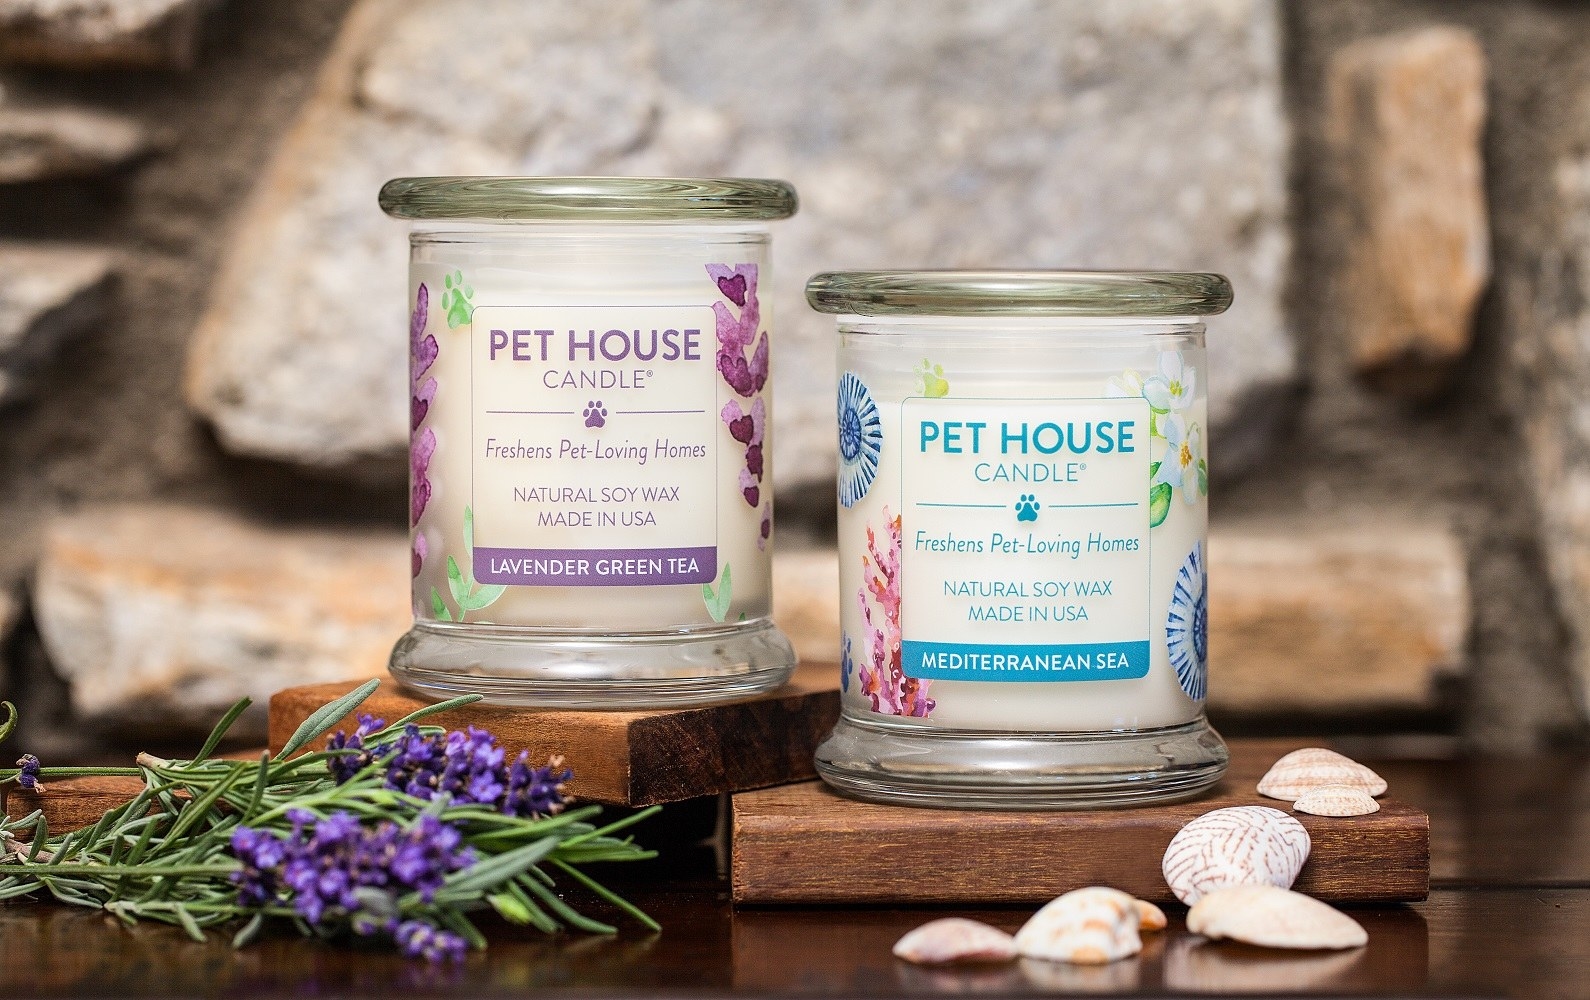 a lavender green tea candle and a mediterranean sea candle in glass jars